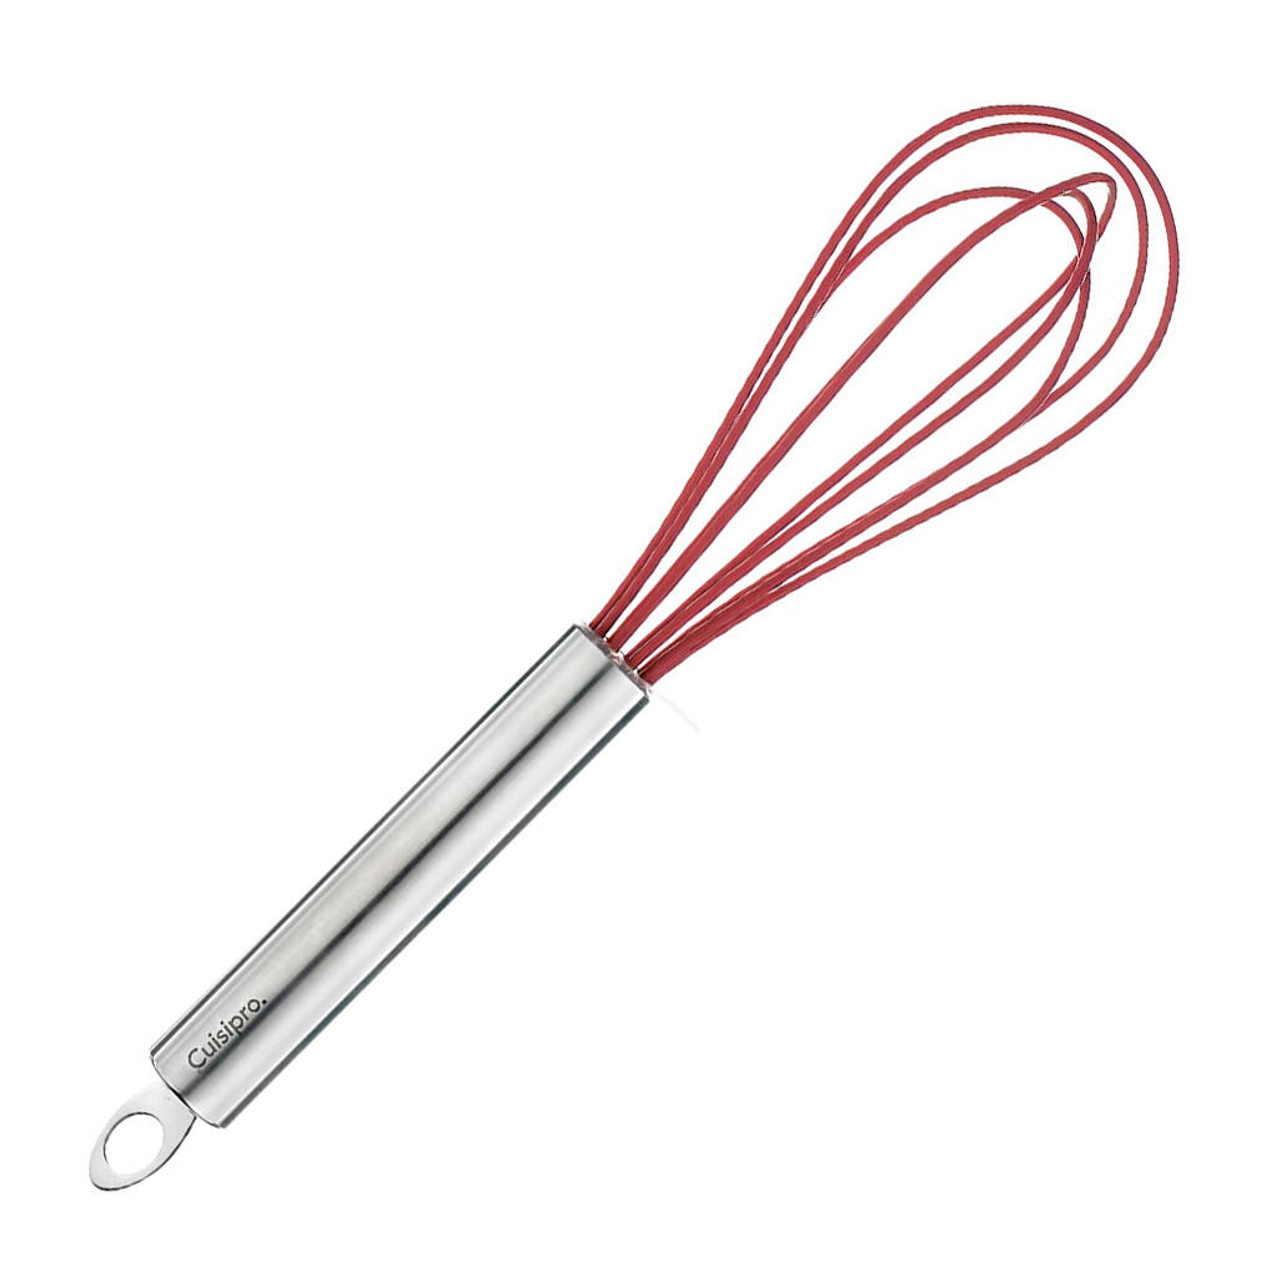 https://cdn11.bigcommerce.com/s-p82jn6co/images/stencil/1280x1280/products/16069/39182/9223-cuisipro-egg-whisk-red-silicone-8-in__12814.1690134154.jpg?c=2